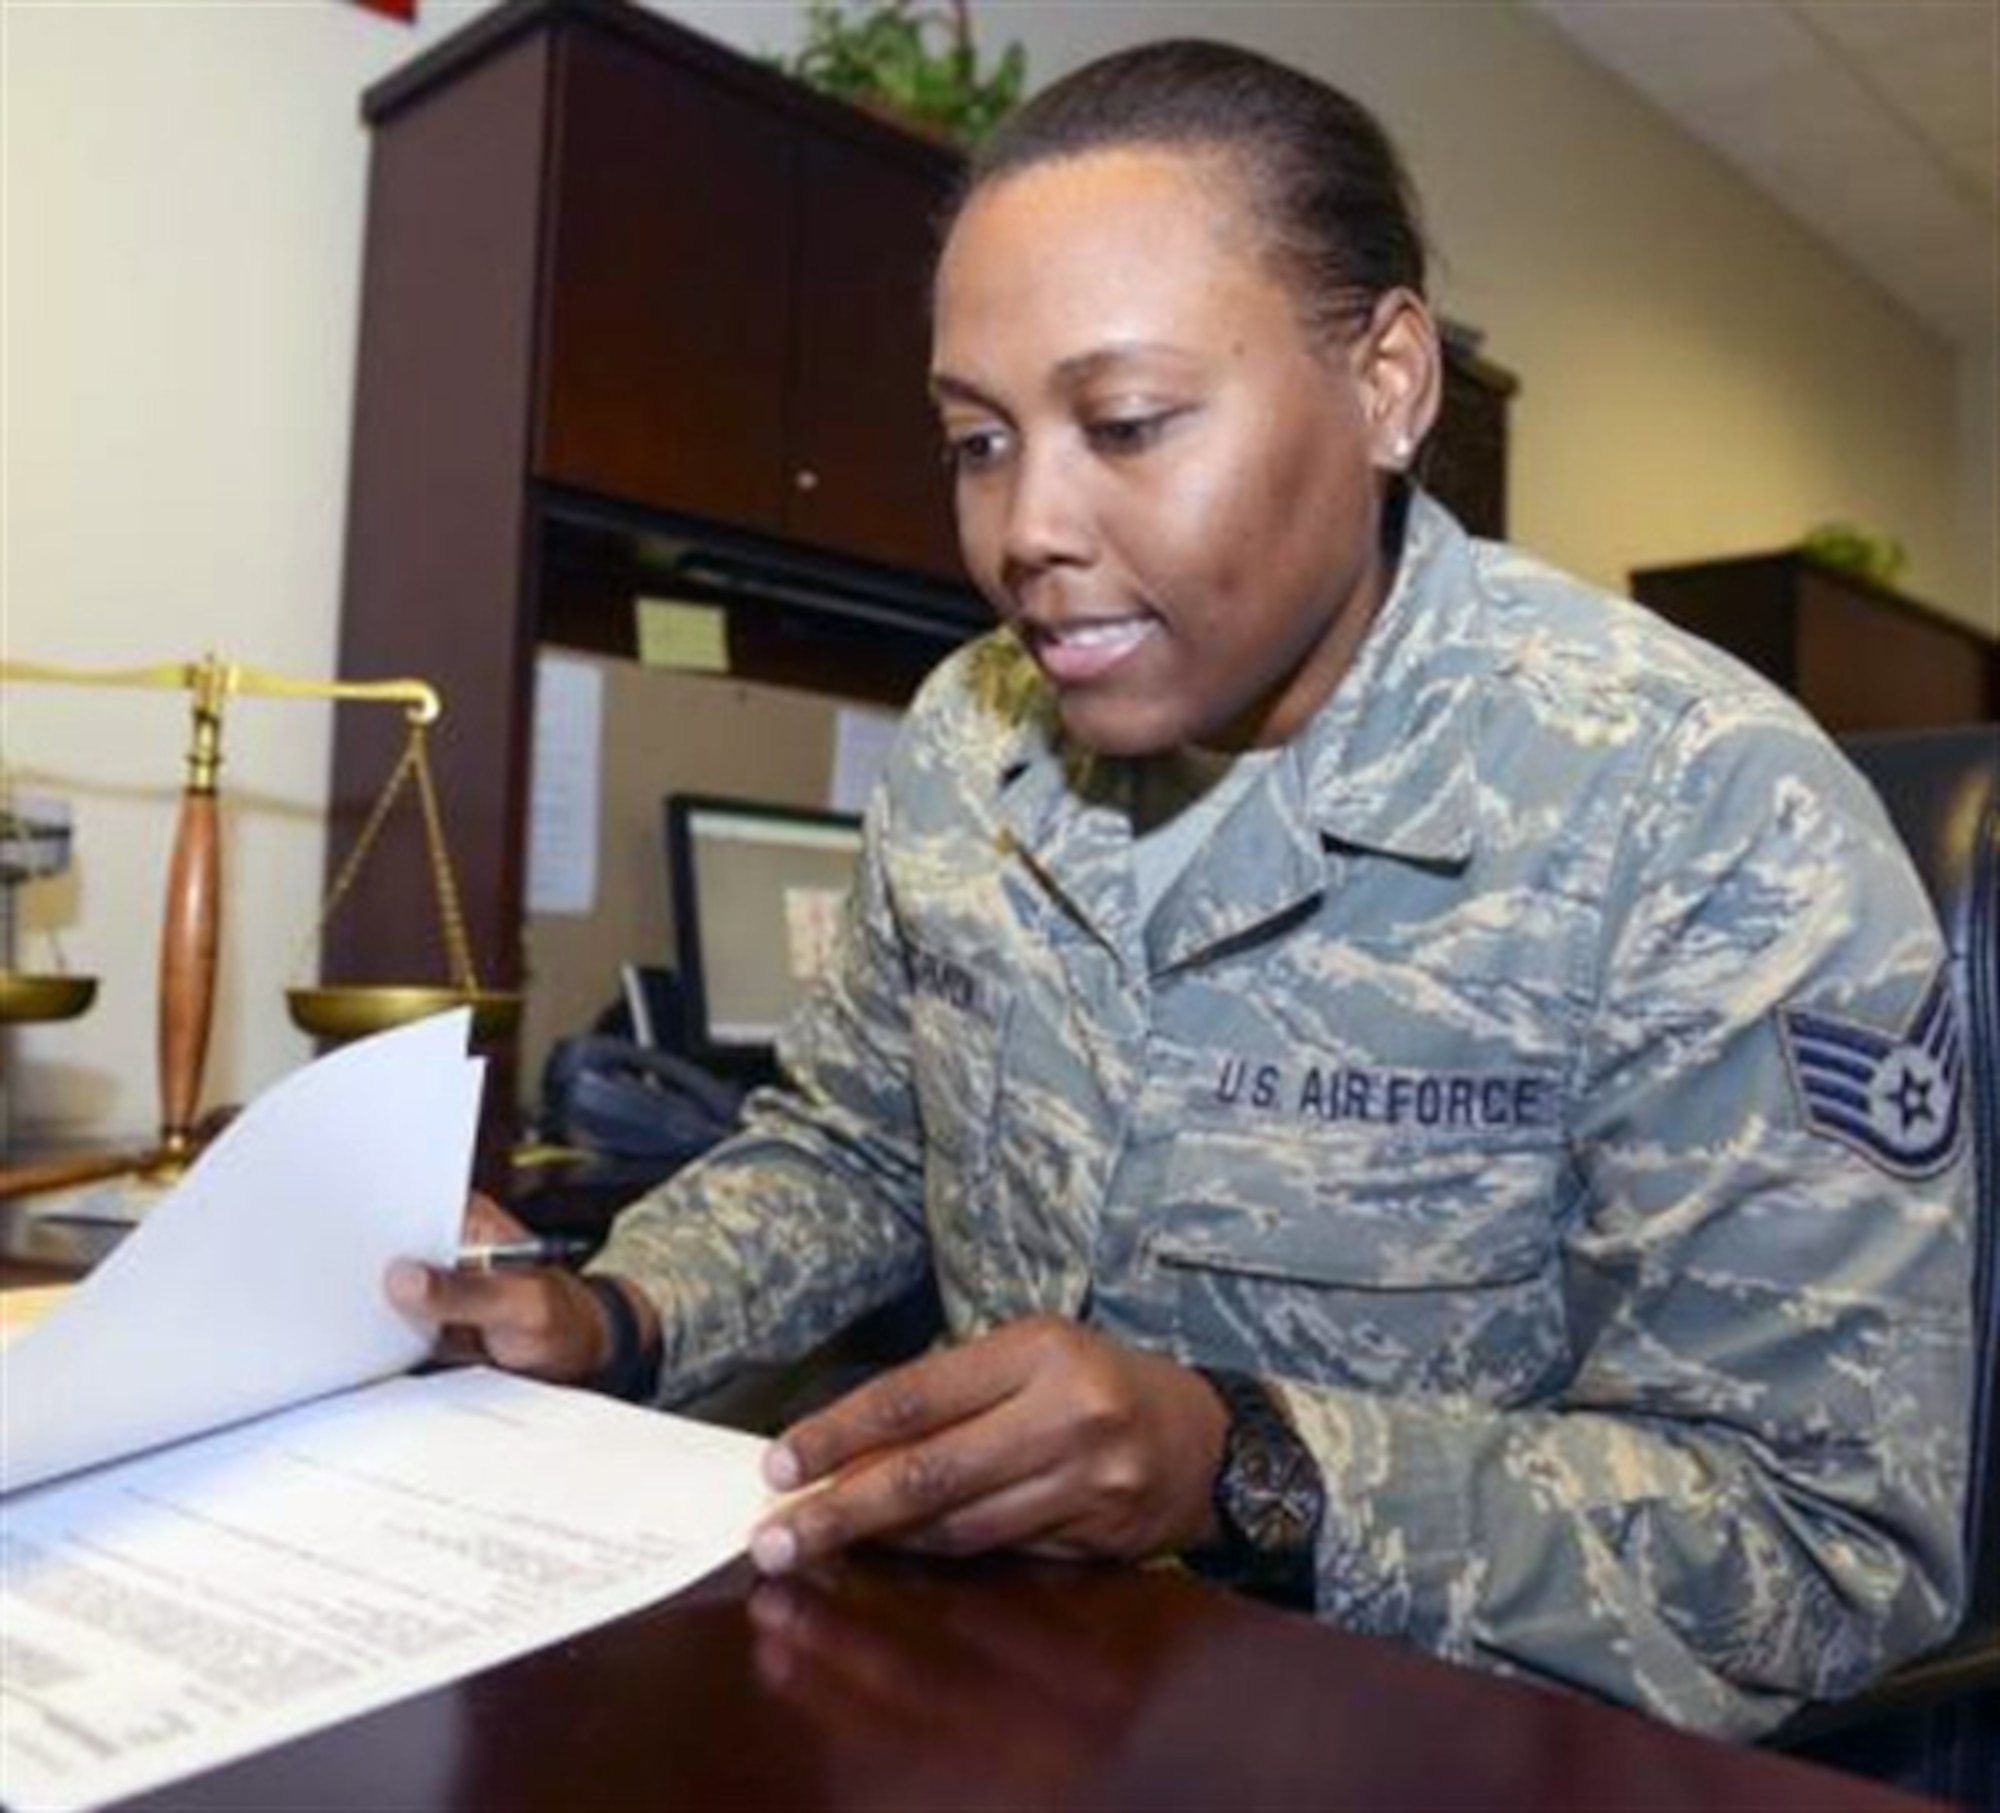 Air Force Staff Sgt. Barricia McCormick, a paralegal with the 116th Air Control Wing, reviews legal cases during a drill weekend at Robins Feb. 8. McCormick, who comes from a long line of family members who have served in the armed forces dating back to World War I, is related to Harriet Ross Tubman, the African American abolitionist and humanitarian responsible for the rescue of more than 300 slaves through the Underground Railroad. (Georgia Air National Guard photo by Air Force Master Sgt. Roger Parsons)